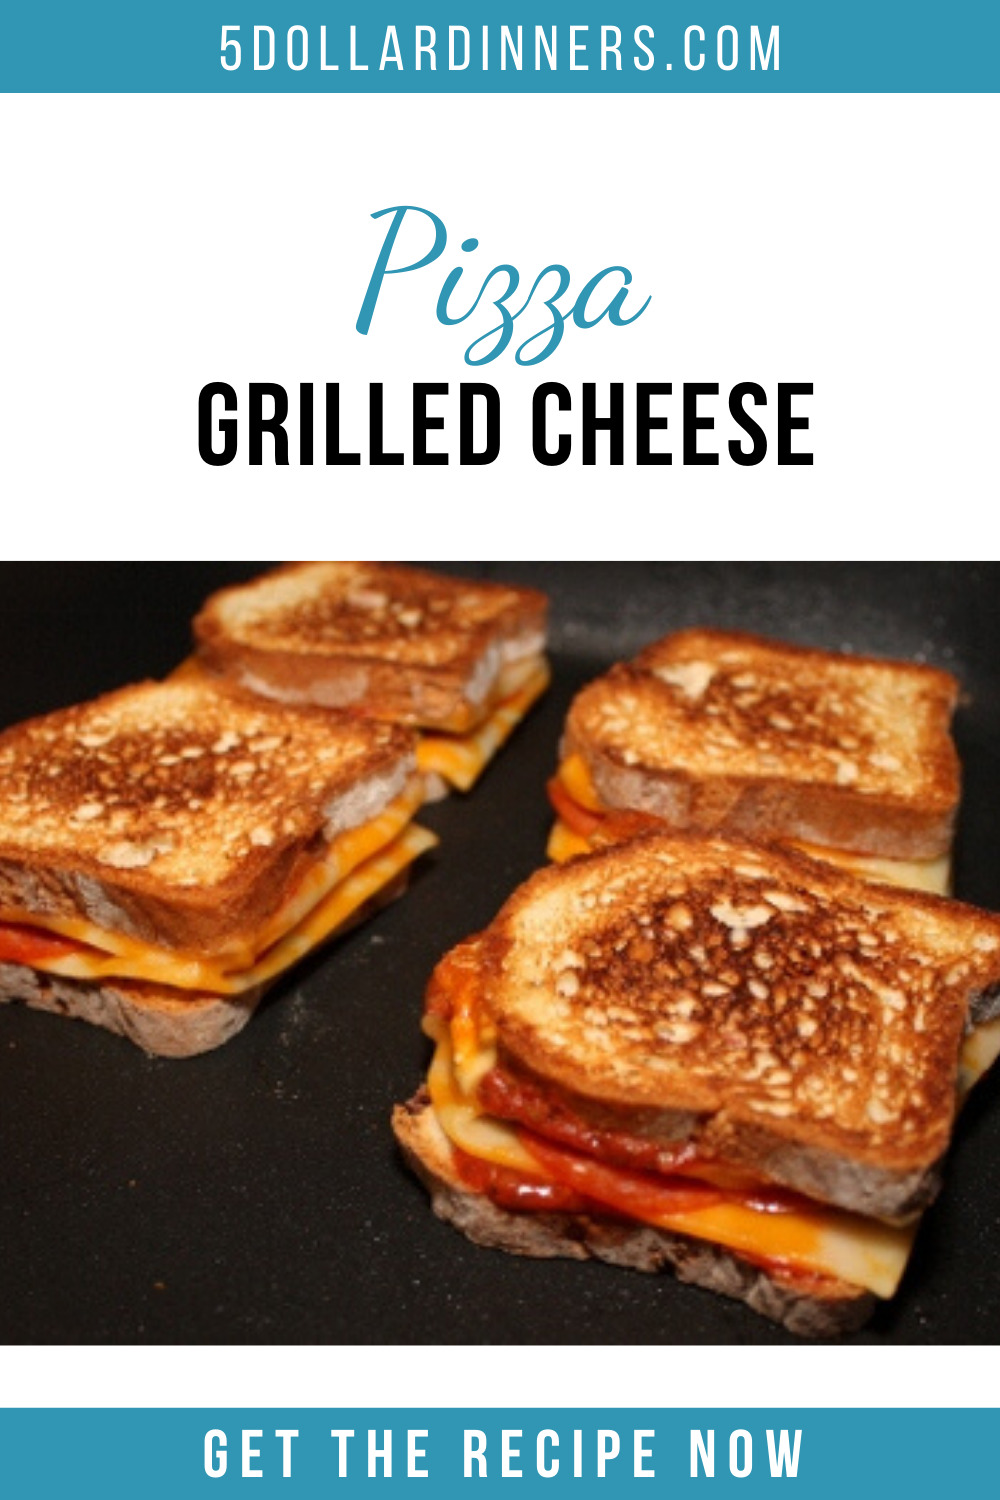 pizza grilled cheese sandwiches